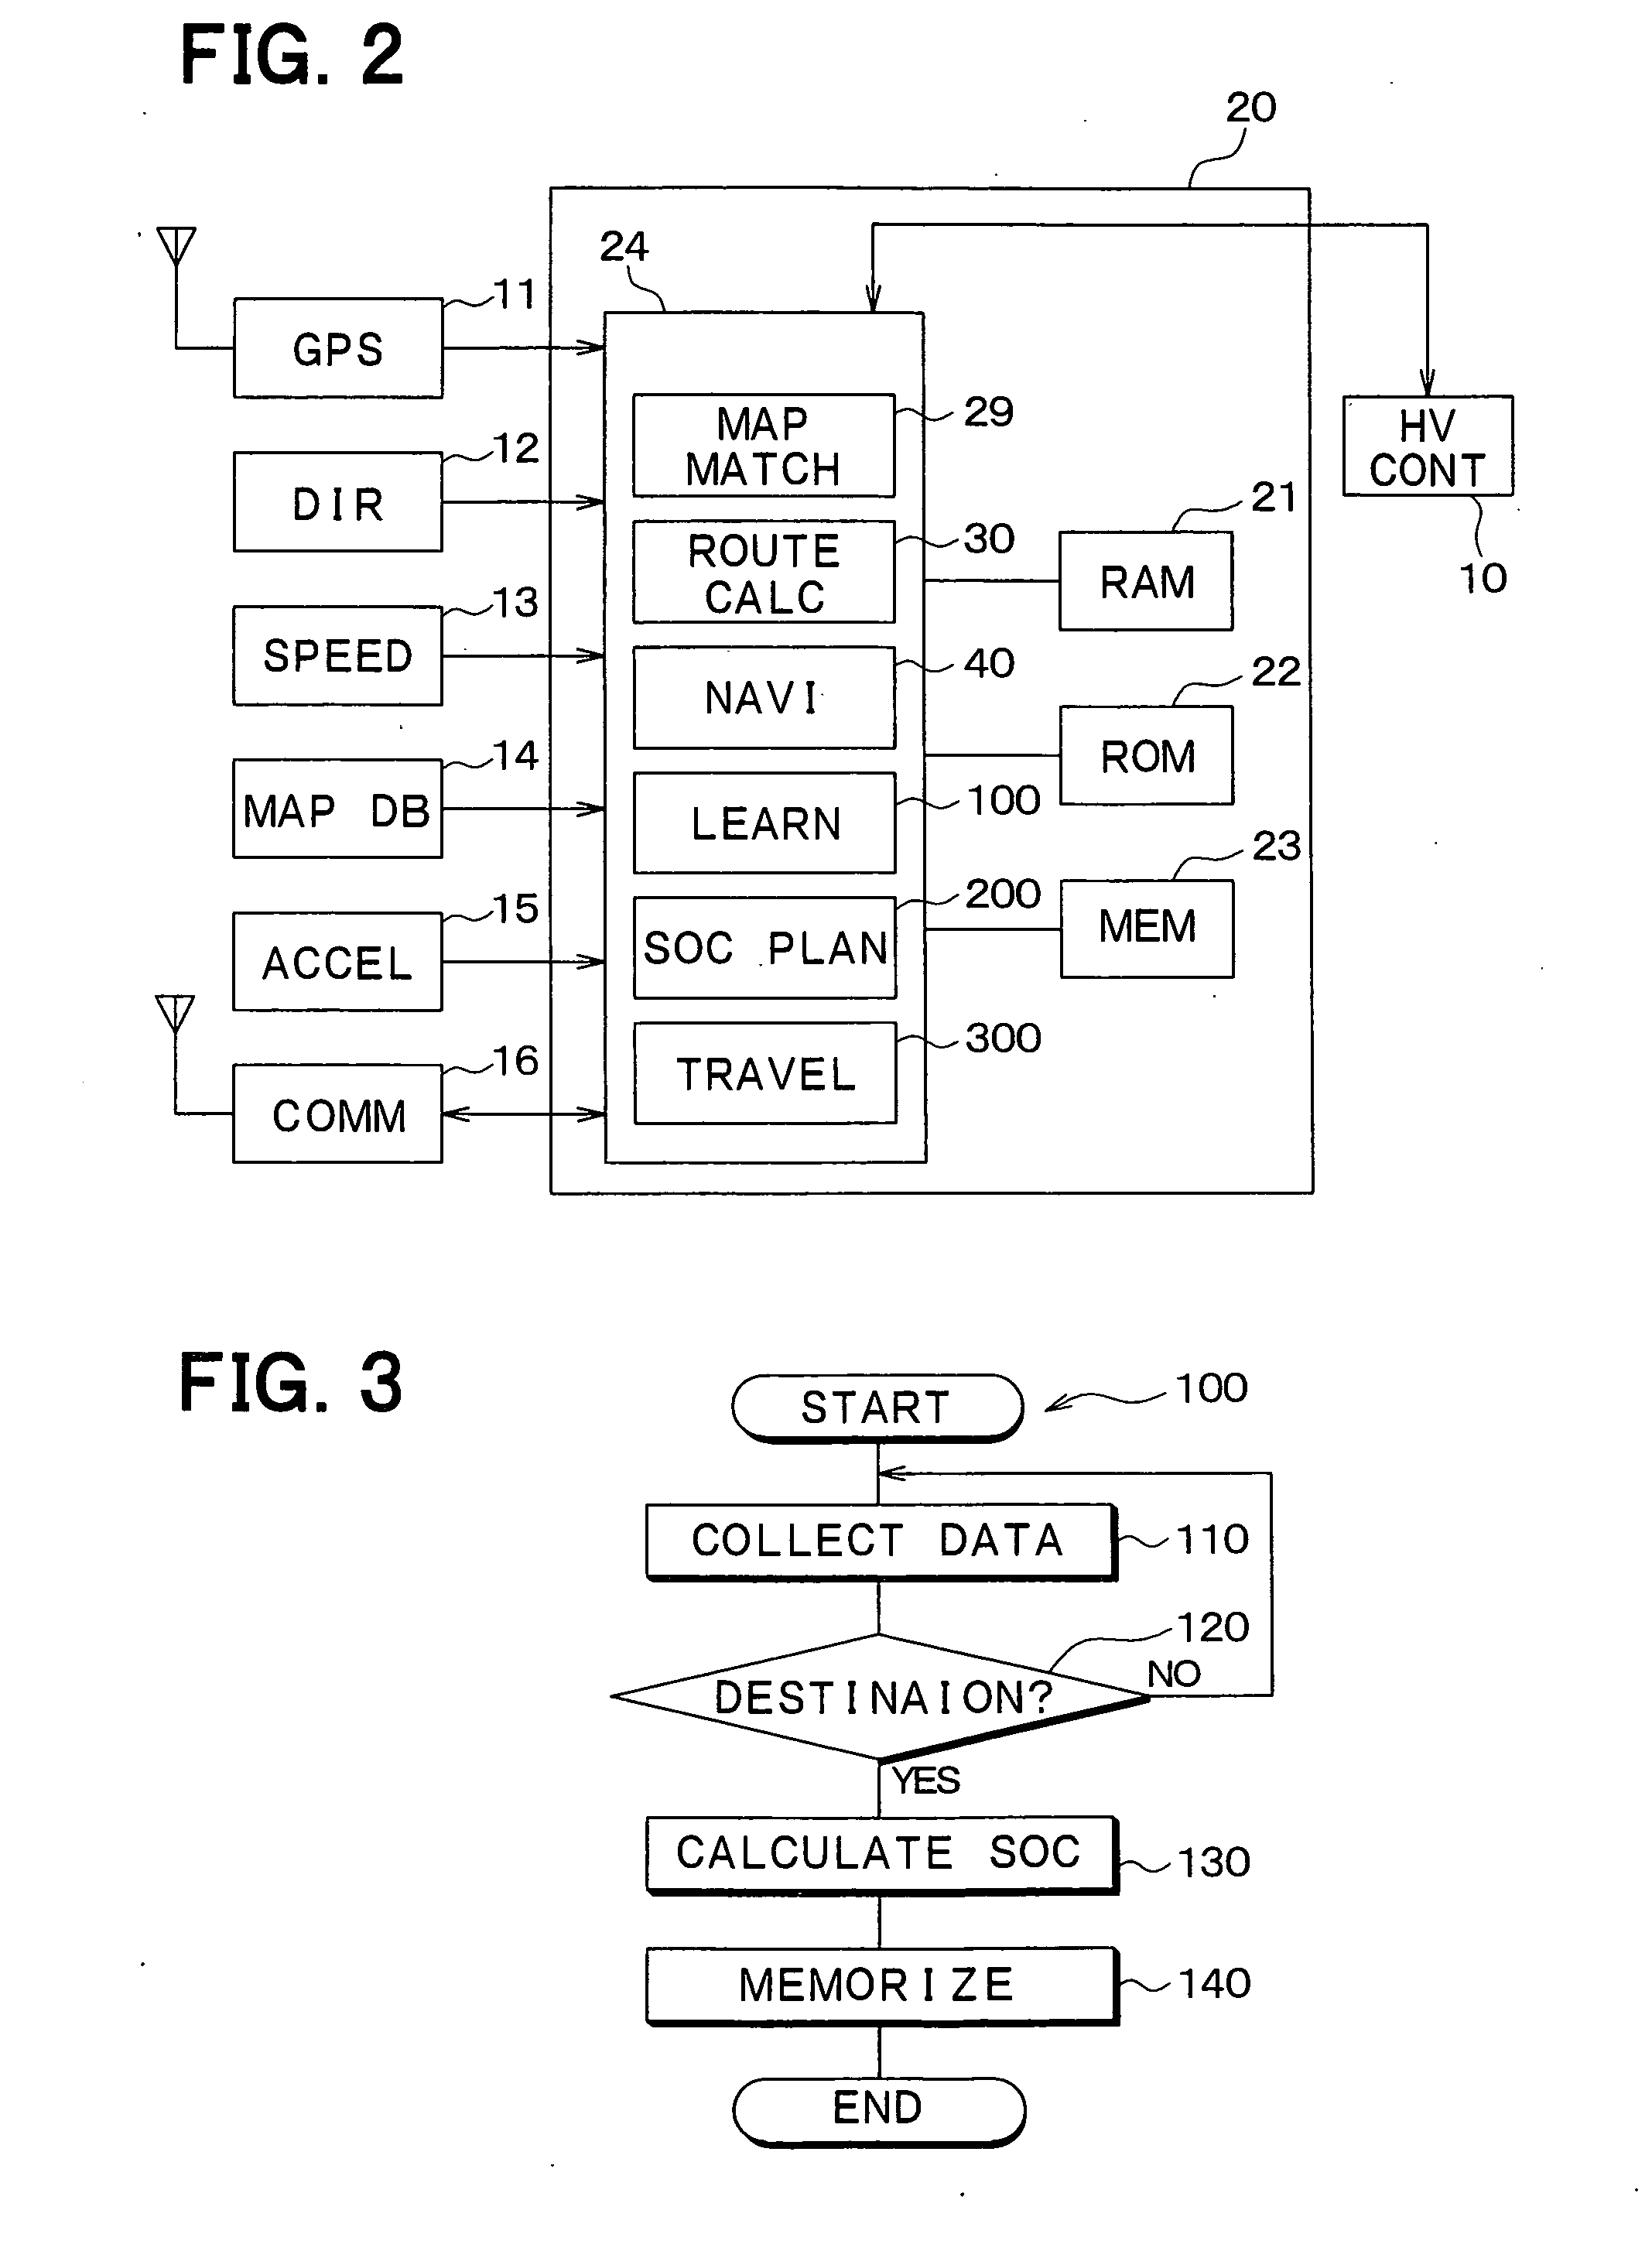 Charge planning apparatus